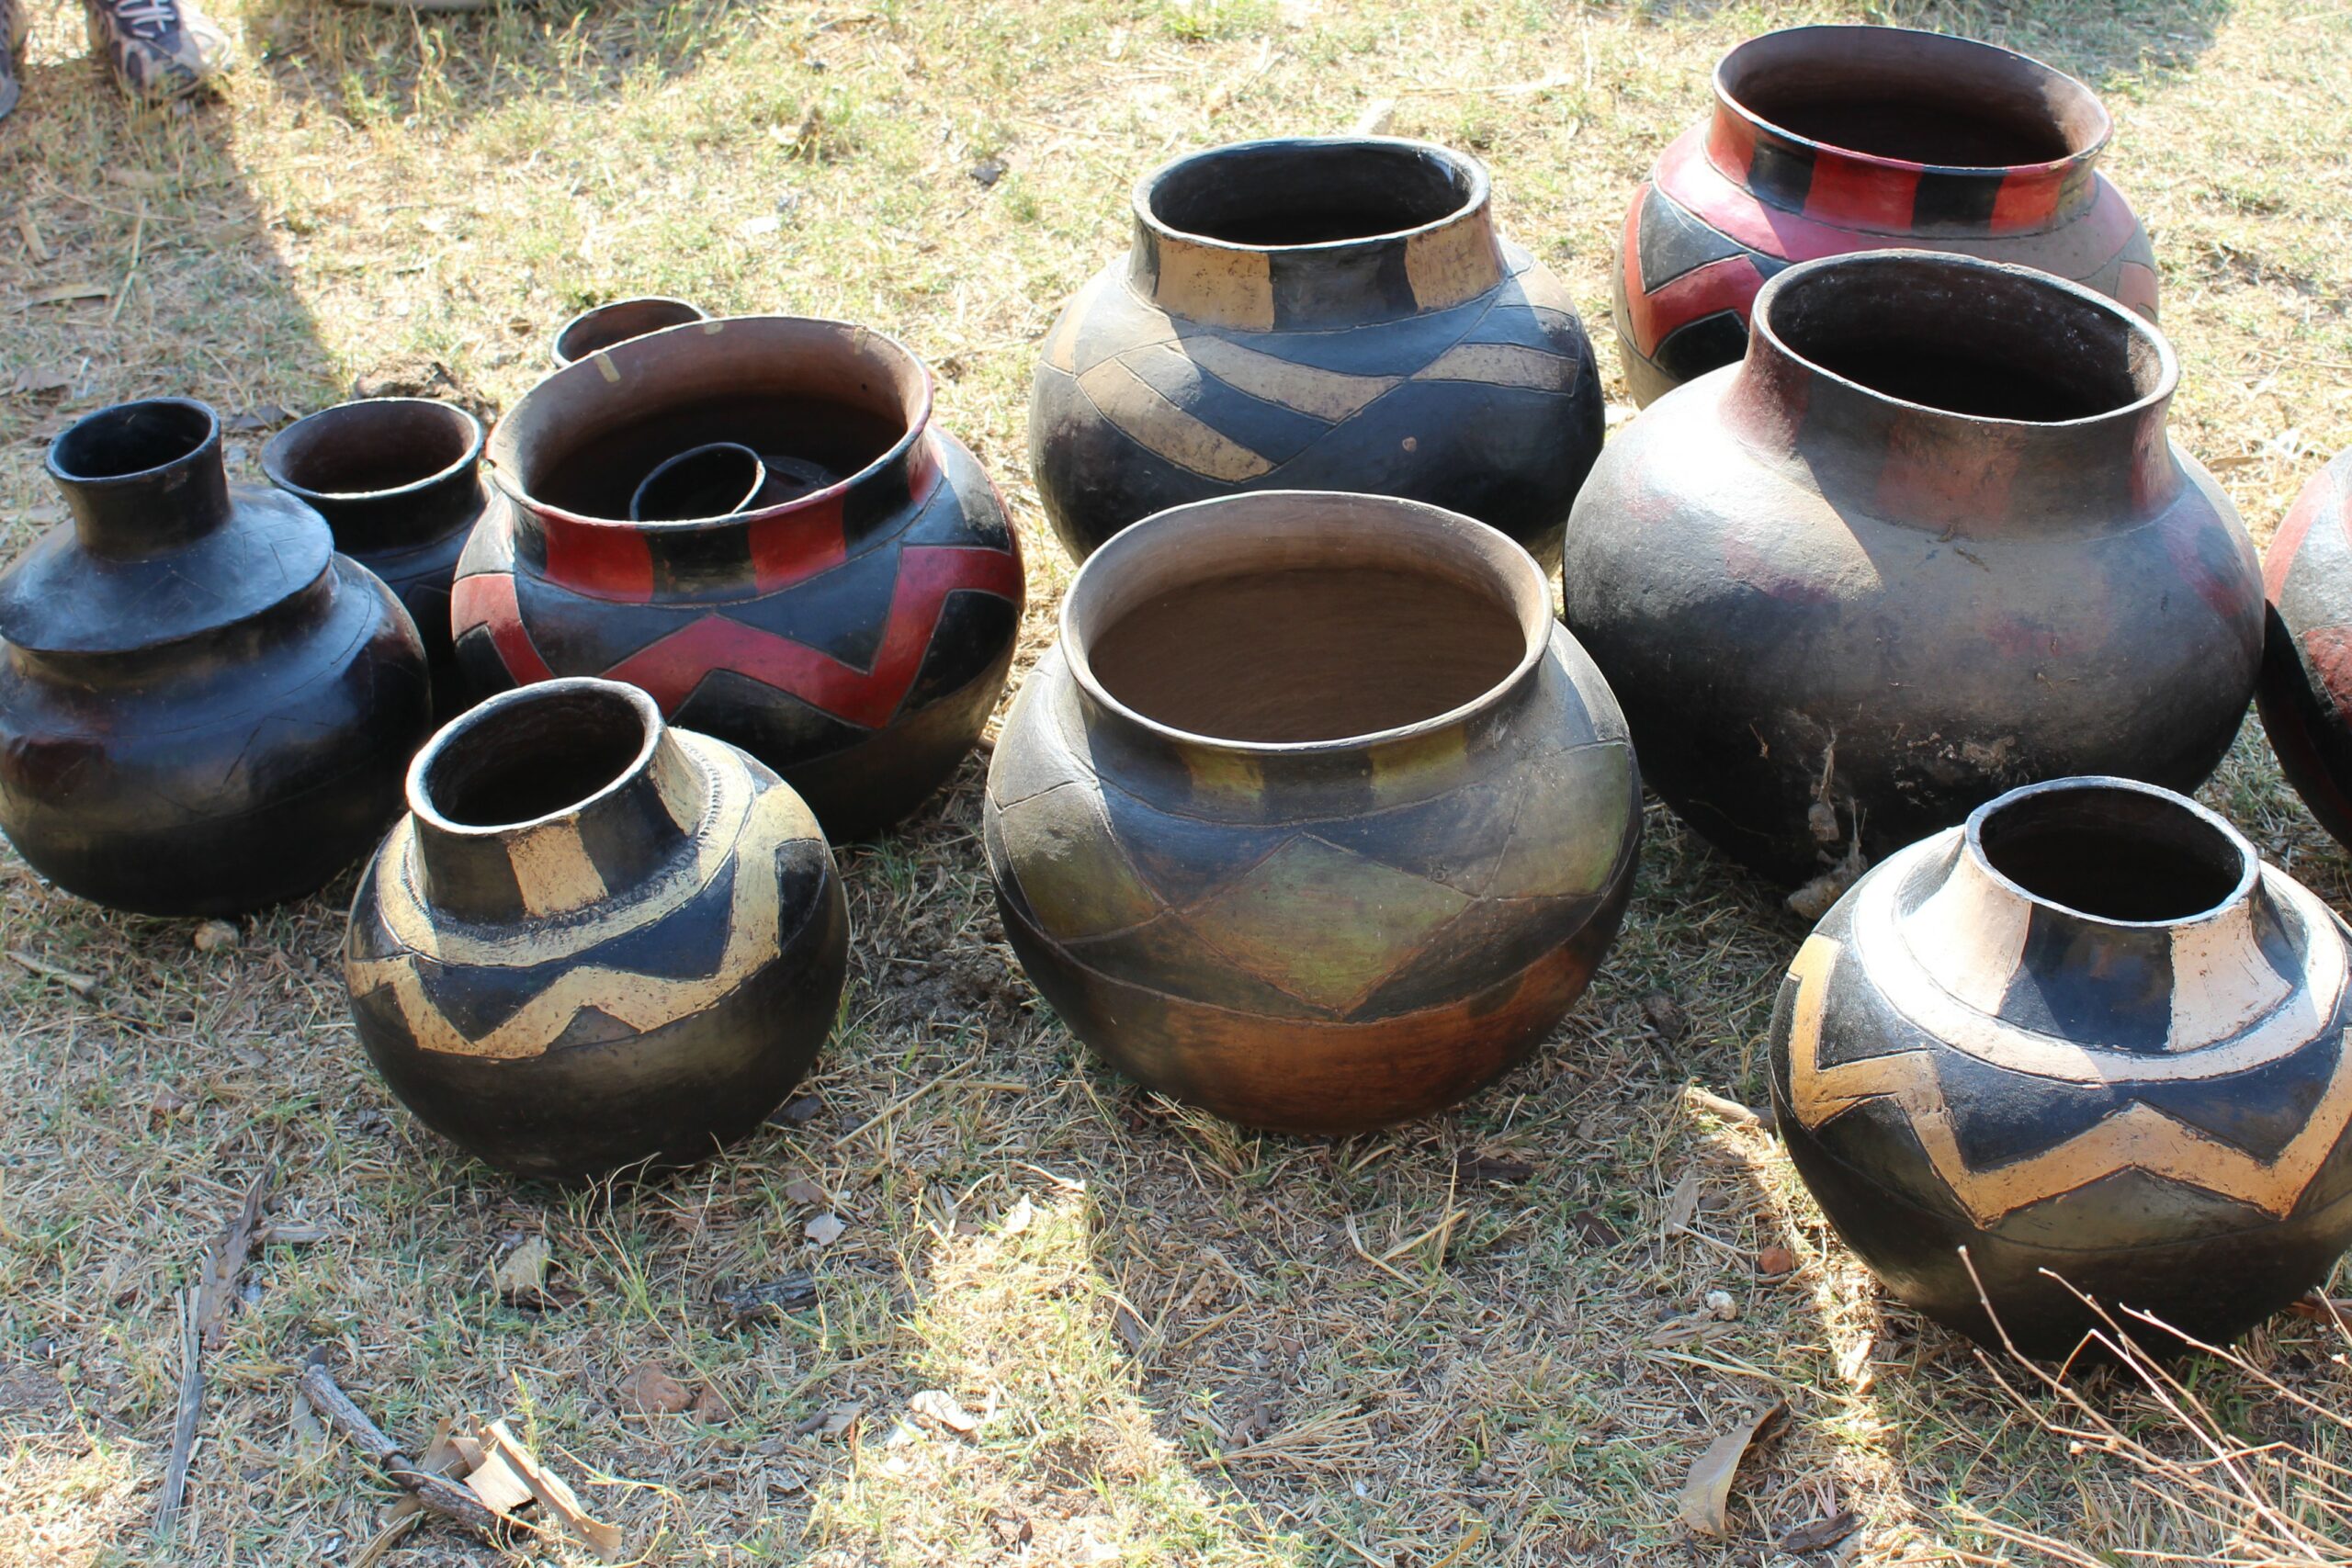 Collection of tradtional Shona pottery